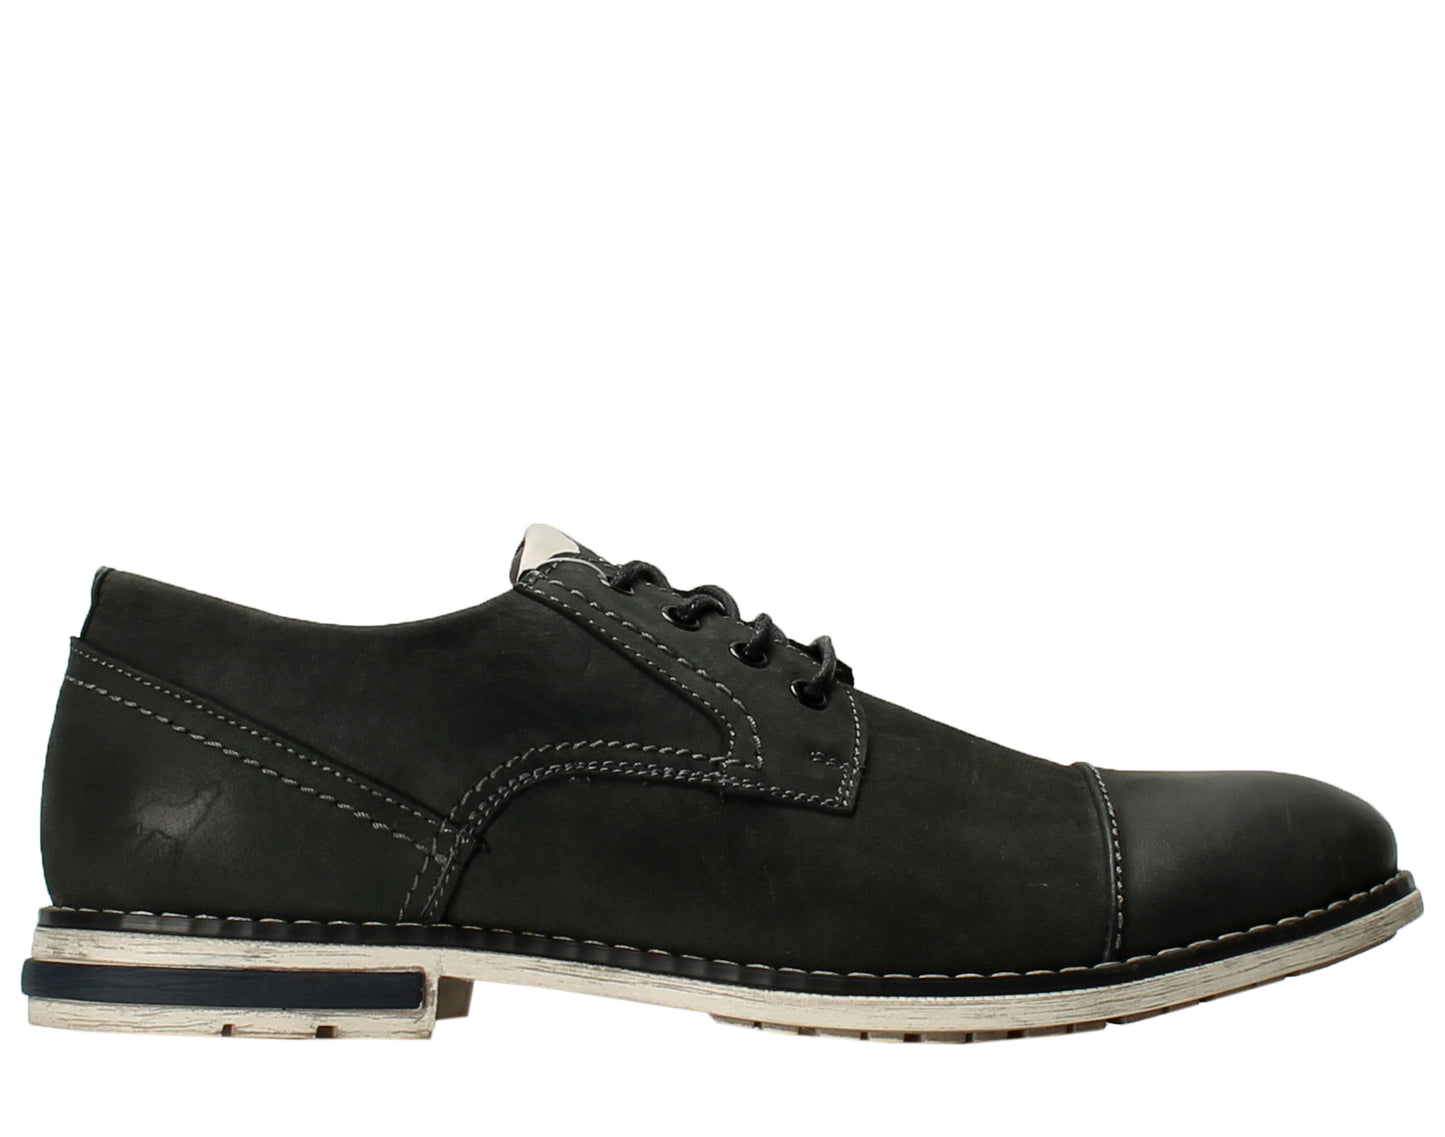 Howling Wolf Springs Cap Toe Oxford Men's Shoes